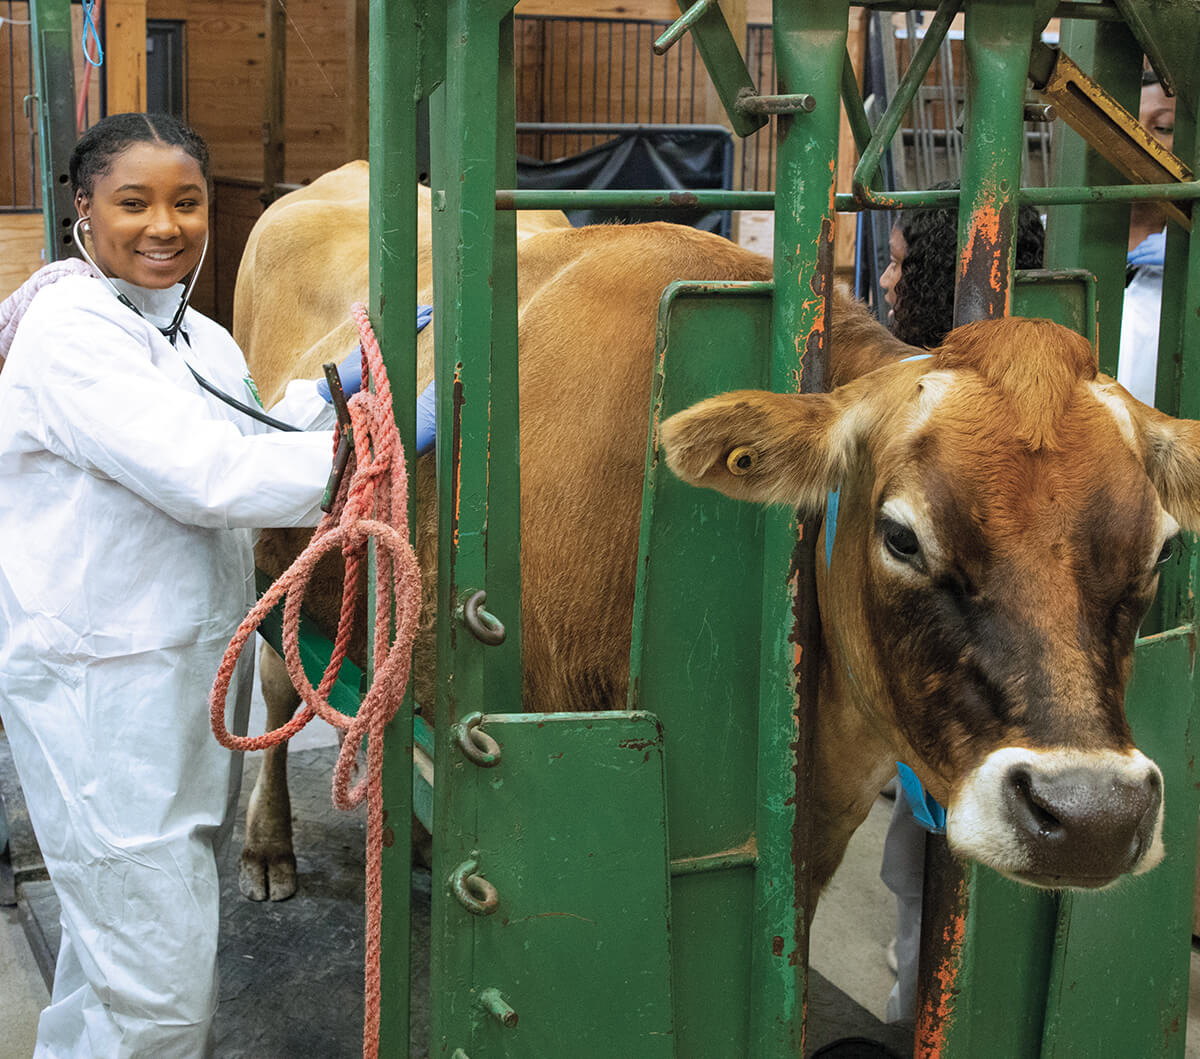 A girl in protective coveralls holds a stethoscope against a cow's side